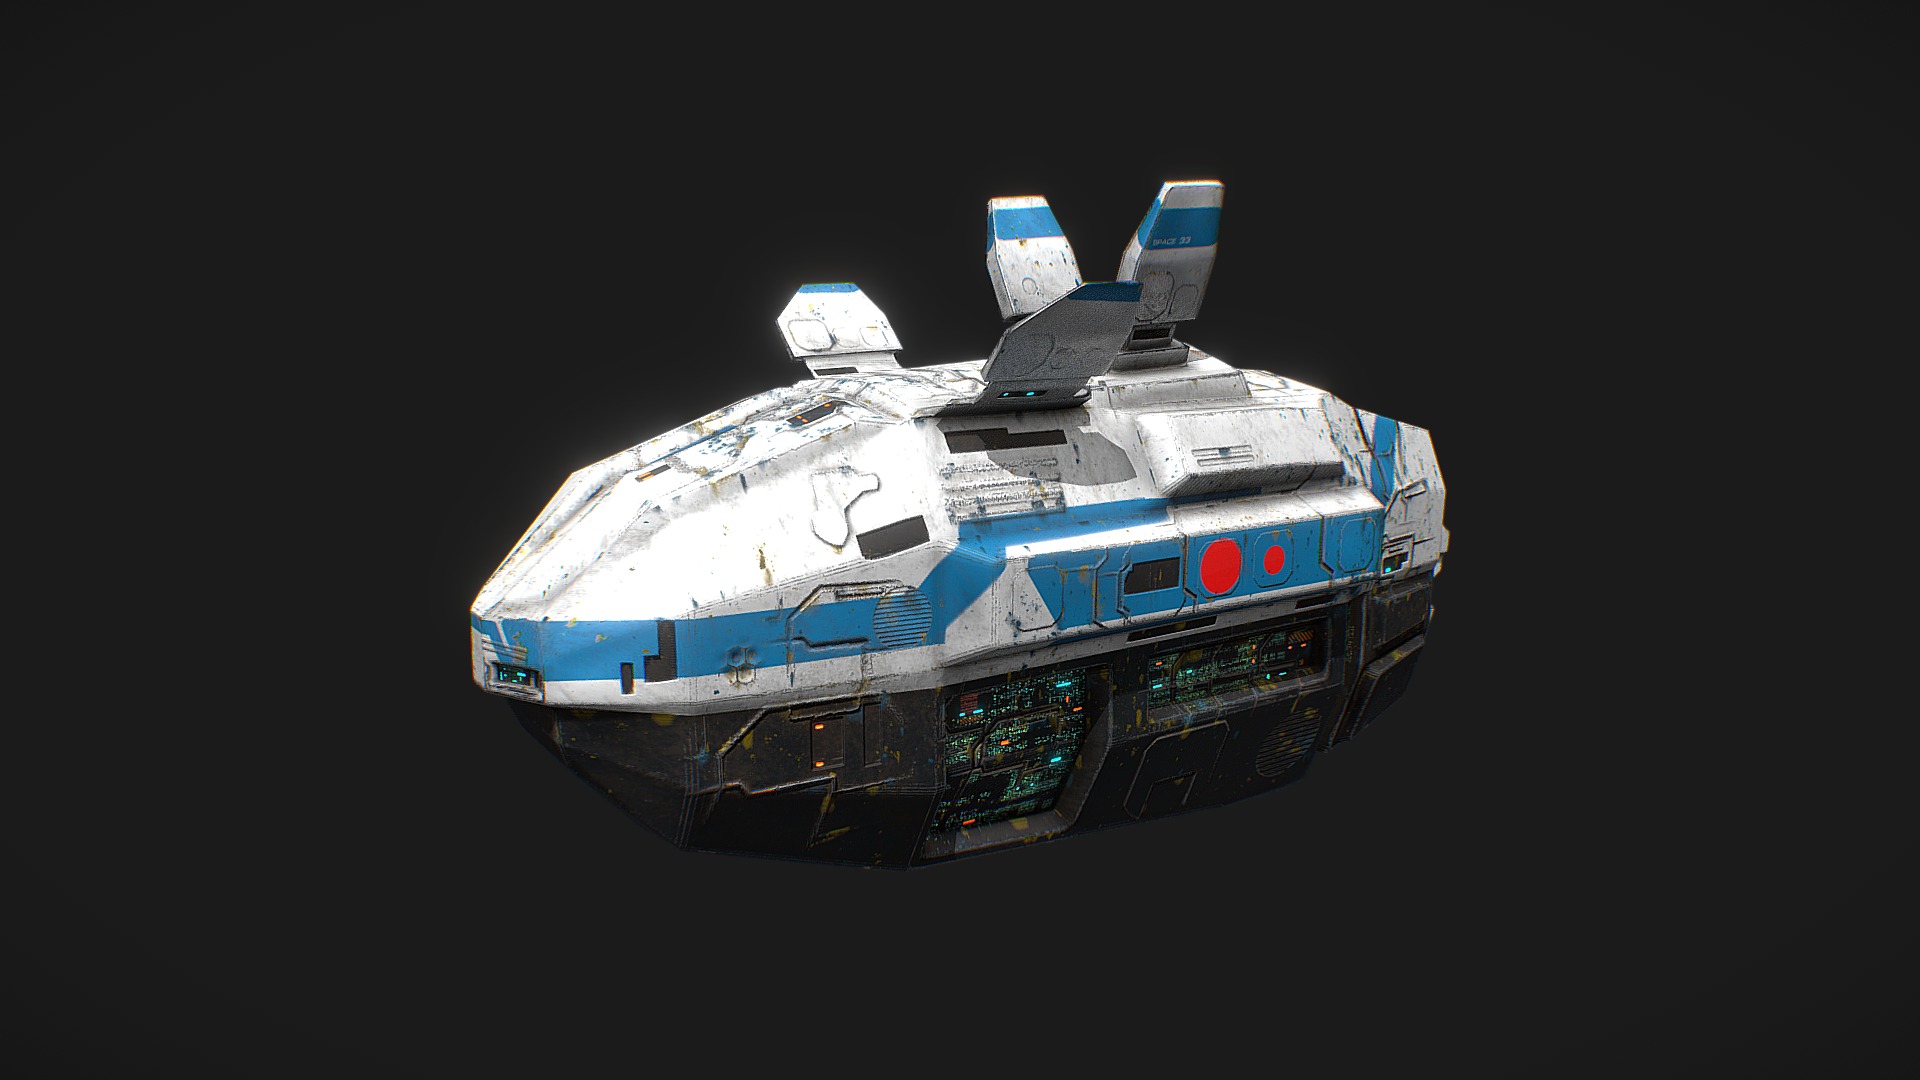 3D model Low poly sci fi space cruiser ship - This is a 3D model of the Low poly sci fi space cruiser ship. The 3D model is about a model of a spaceship.